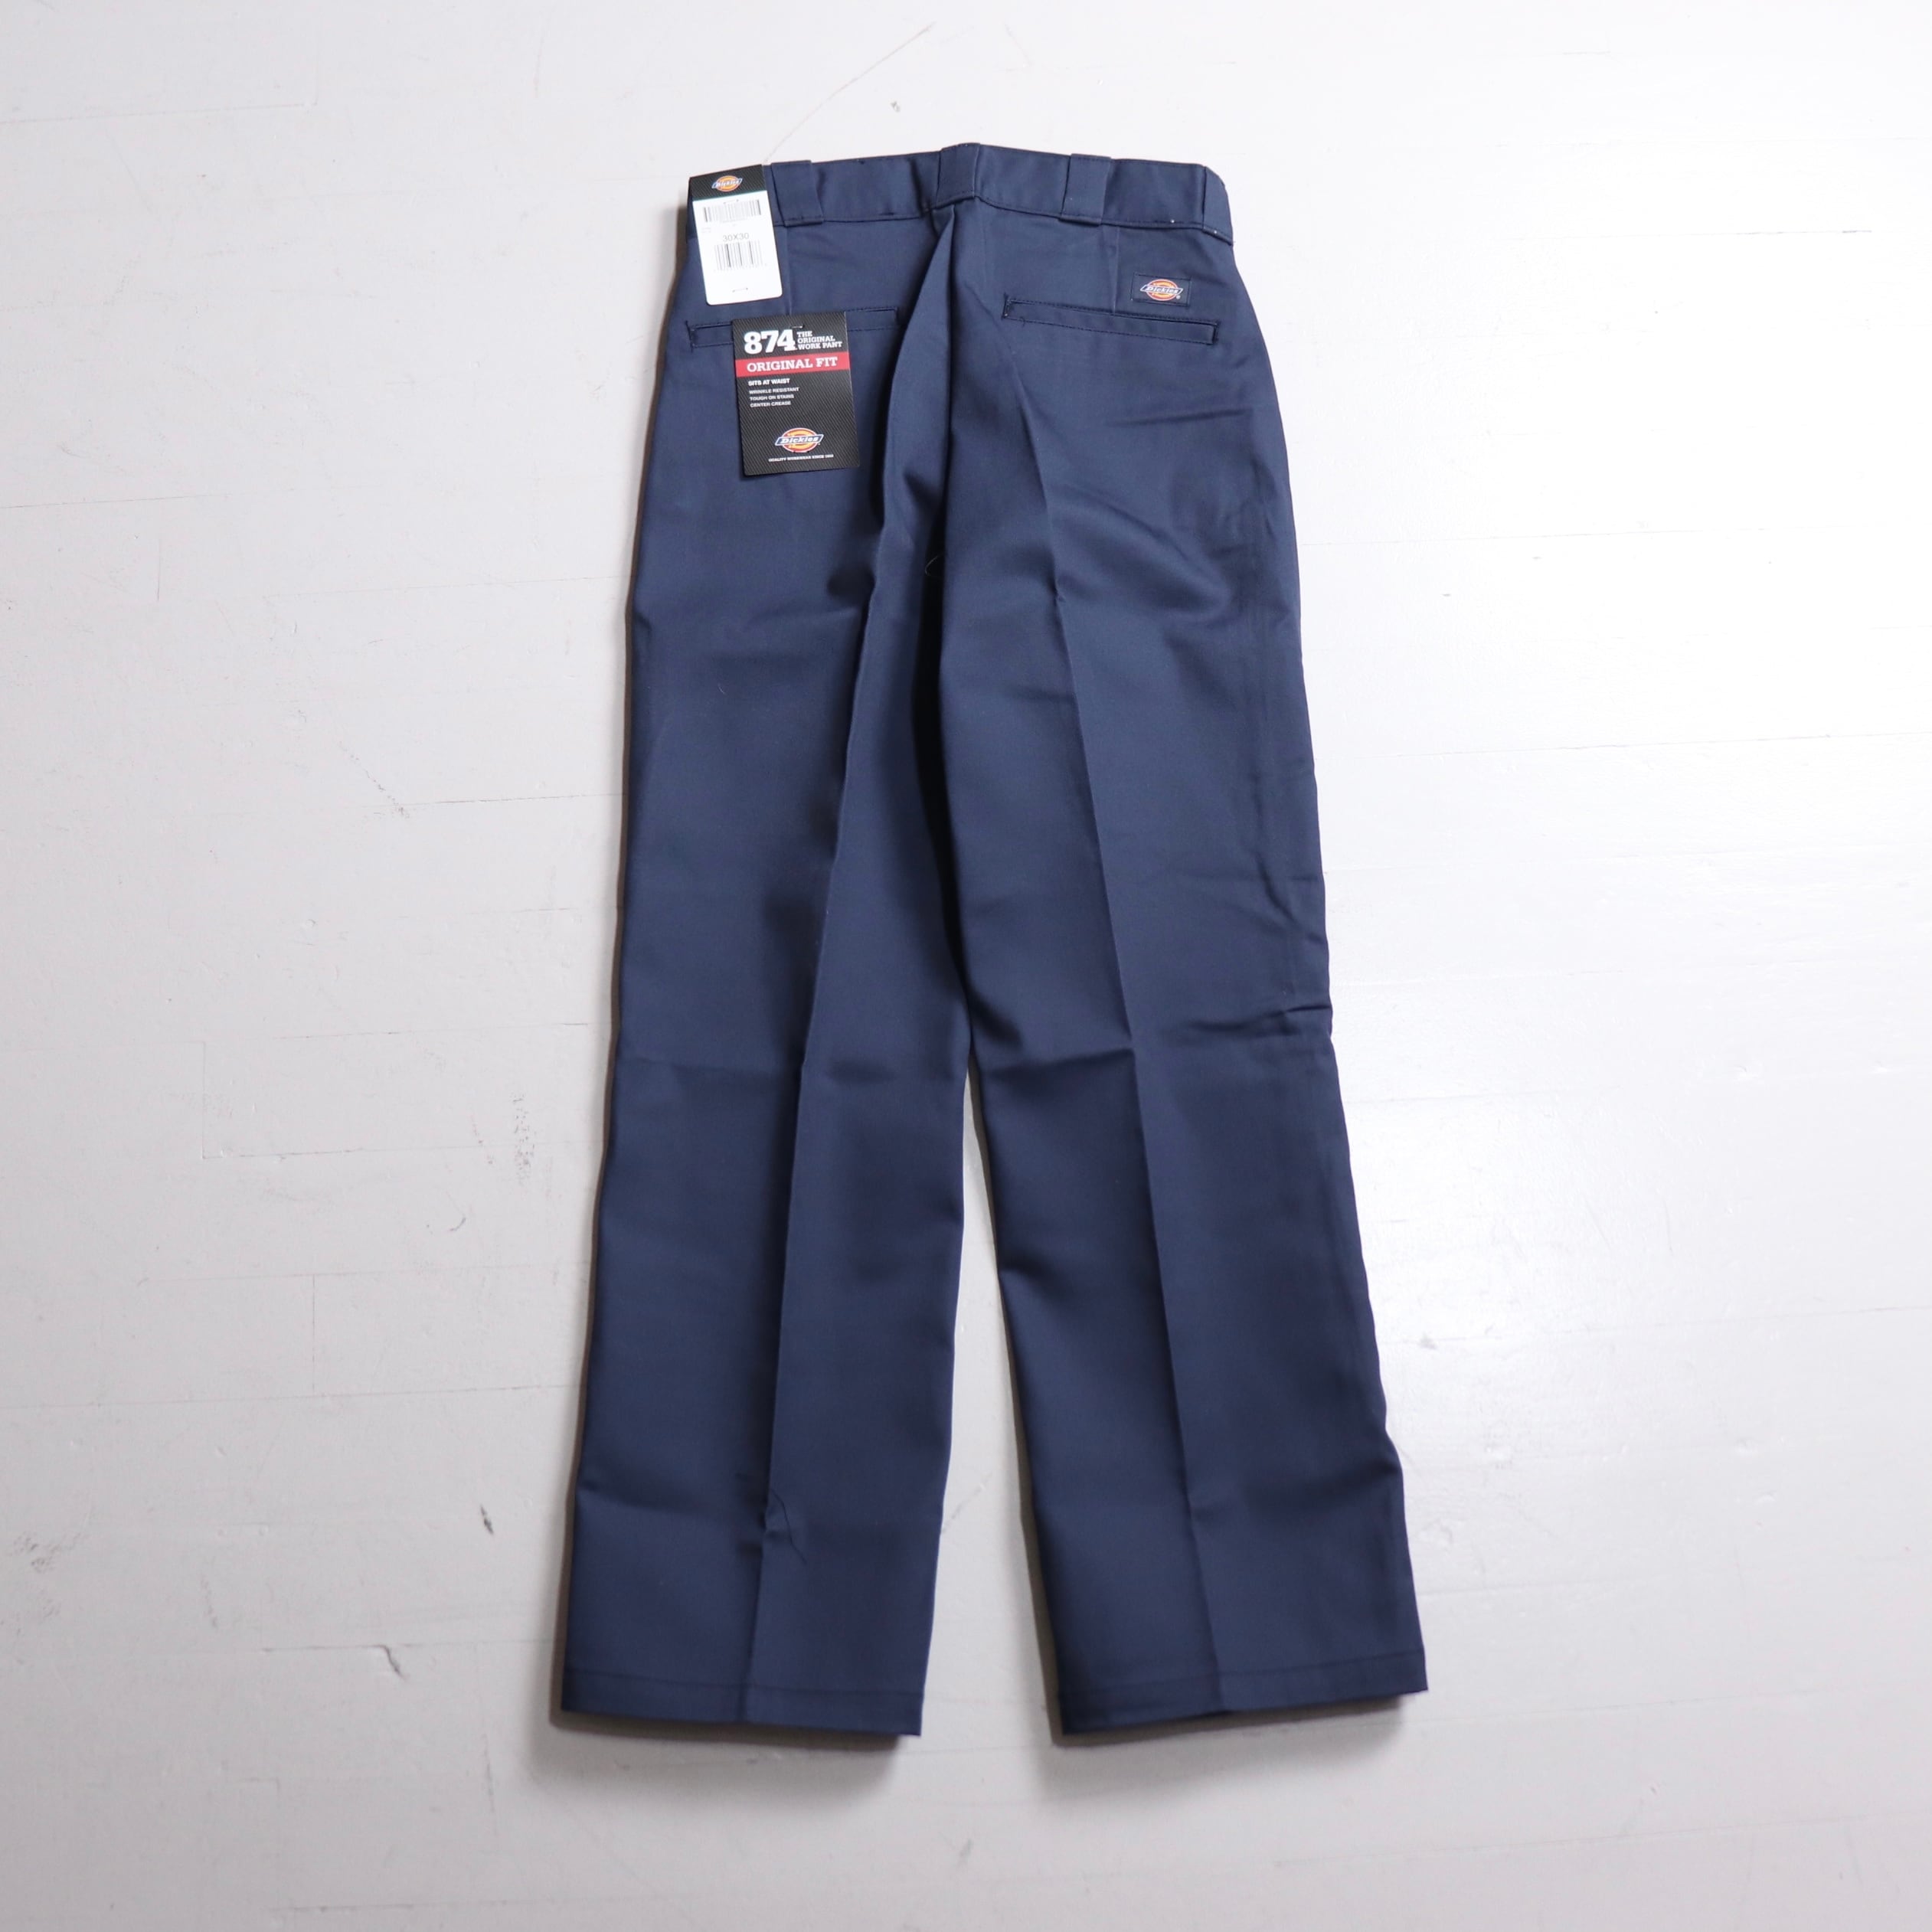 Dickies 874 NAVY Orignal Fit ワークパンツ　W38